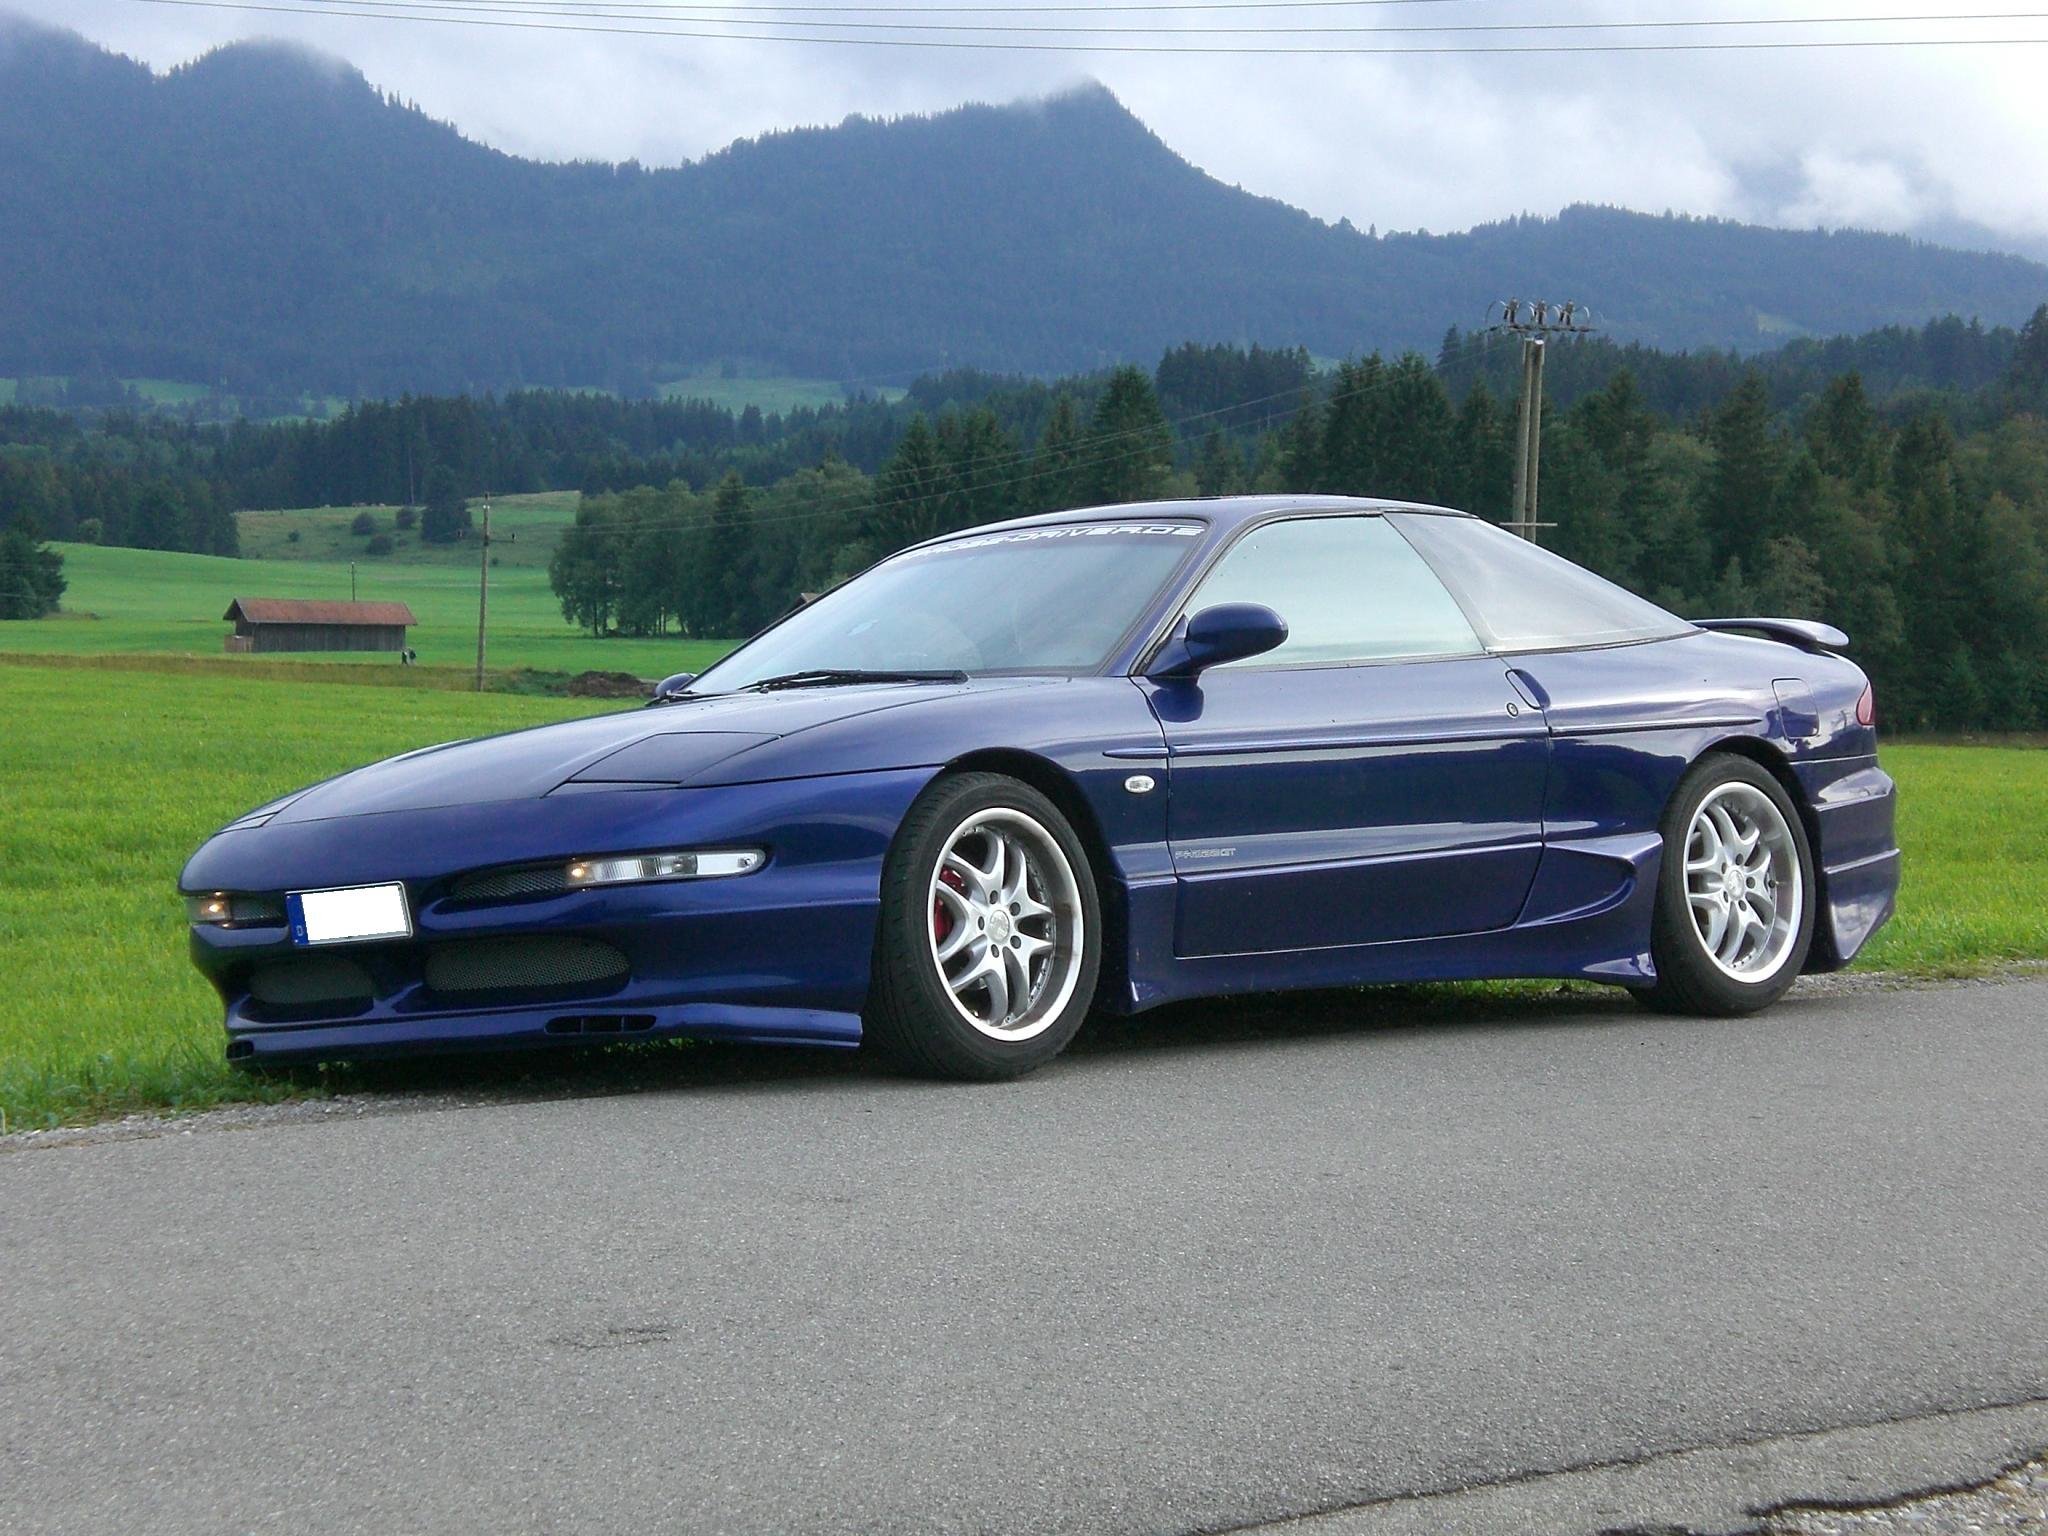 Прода 20. Ford Probe 2. Ford Probe gt 2.2. Ford Probe 1989 gt. Ford Probe 1 gt.